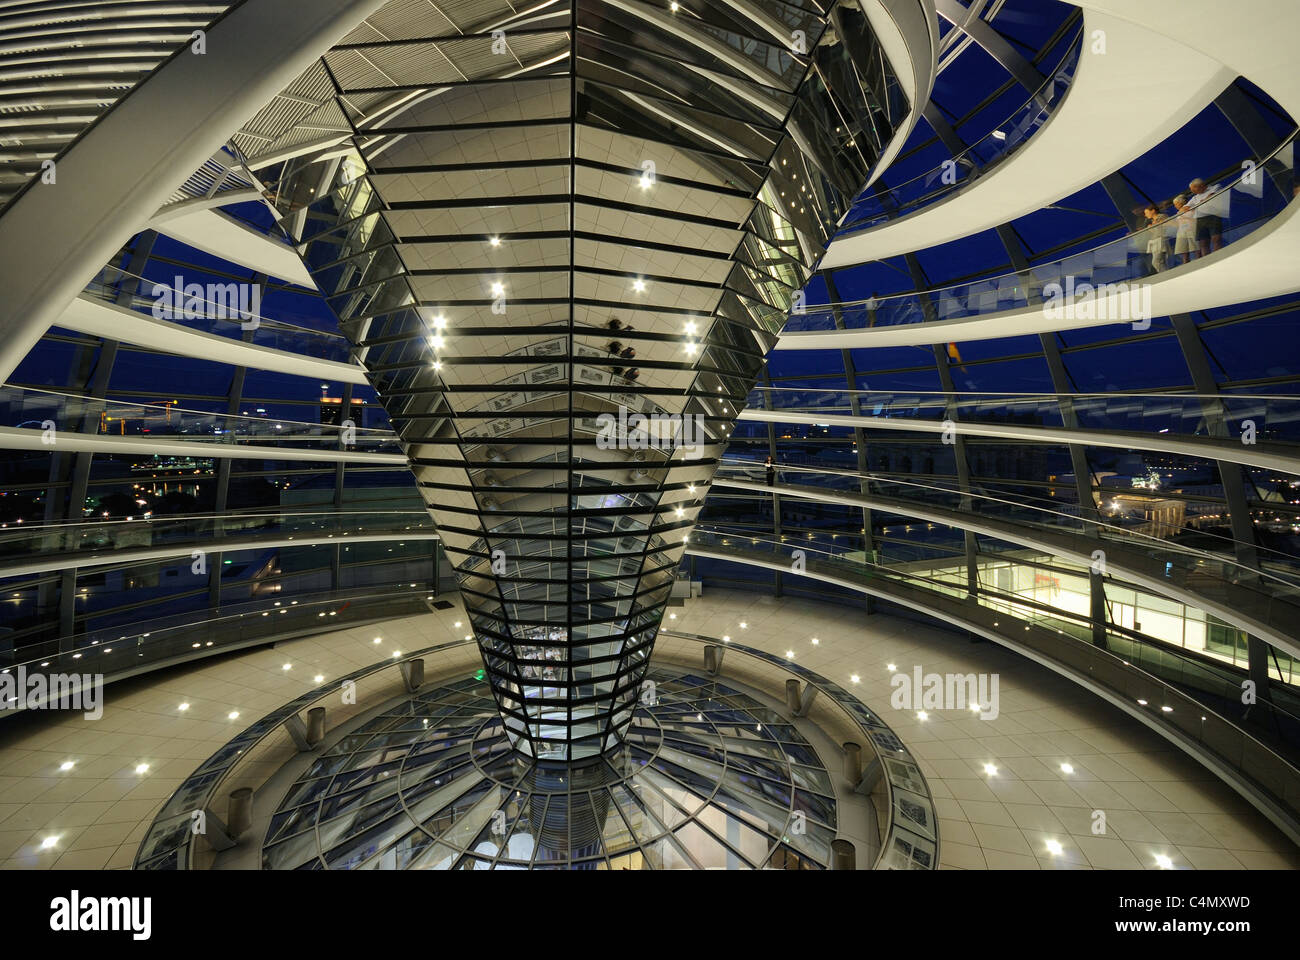 Reichstag dome at night, interior, Reichstag building, seat of the German Bundestag federal parliament, Berlin, Germany, Europe Stock Photo